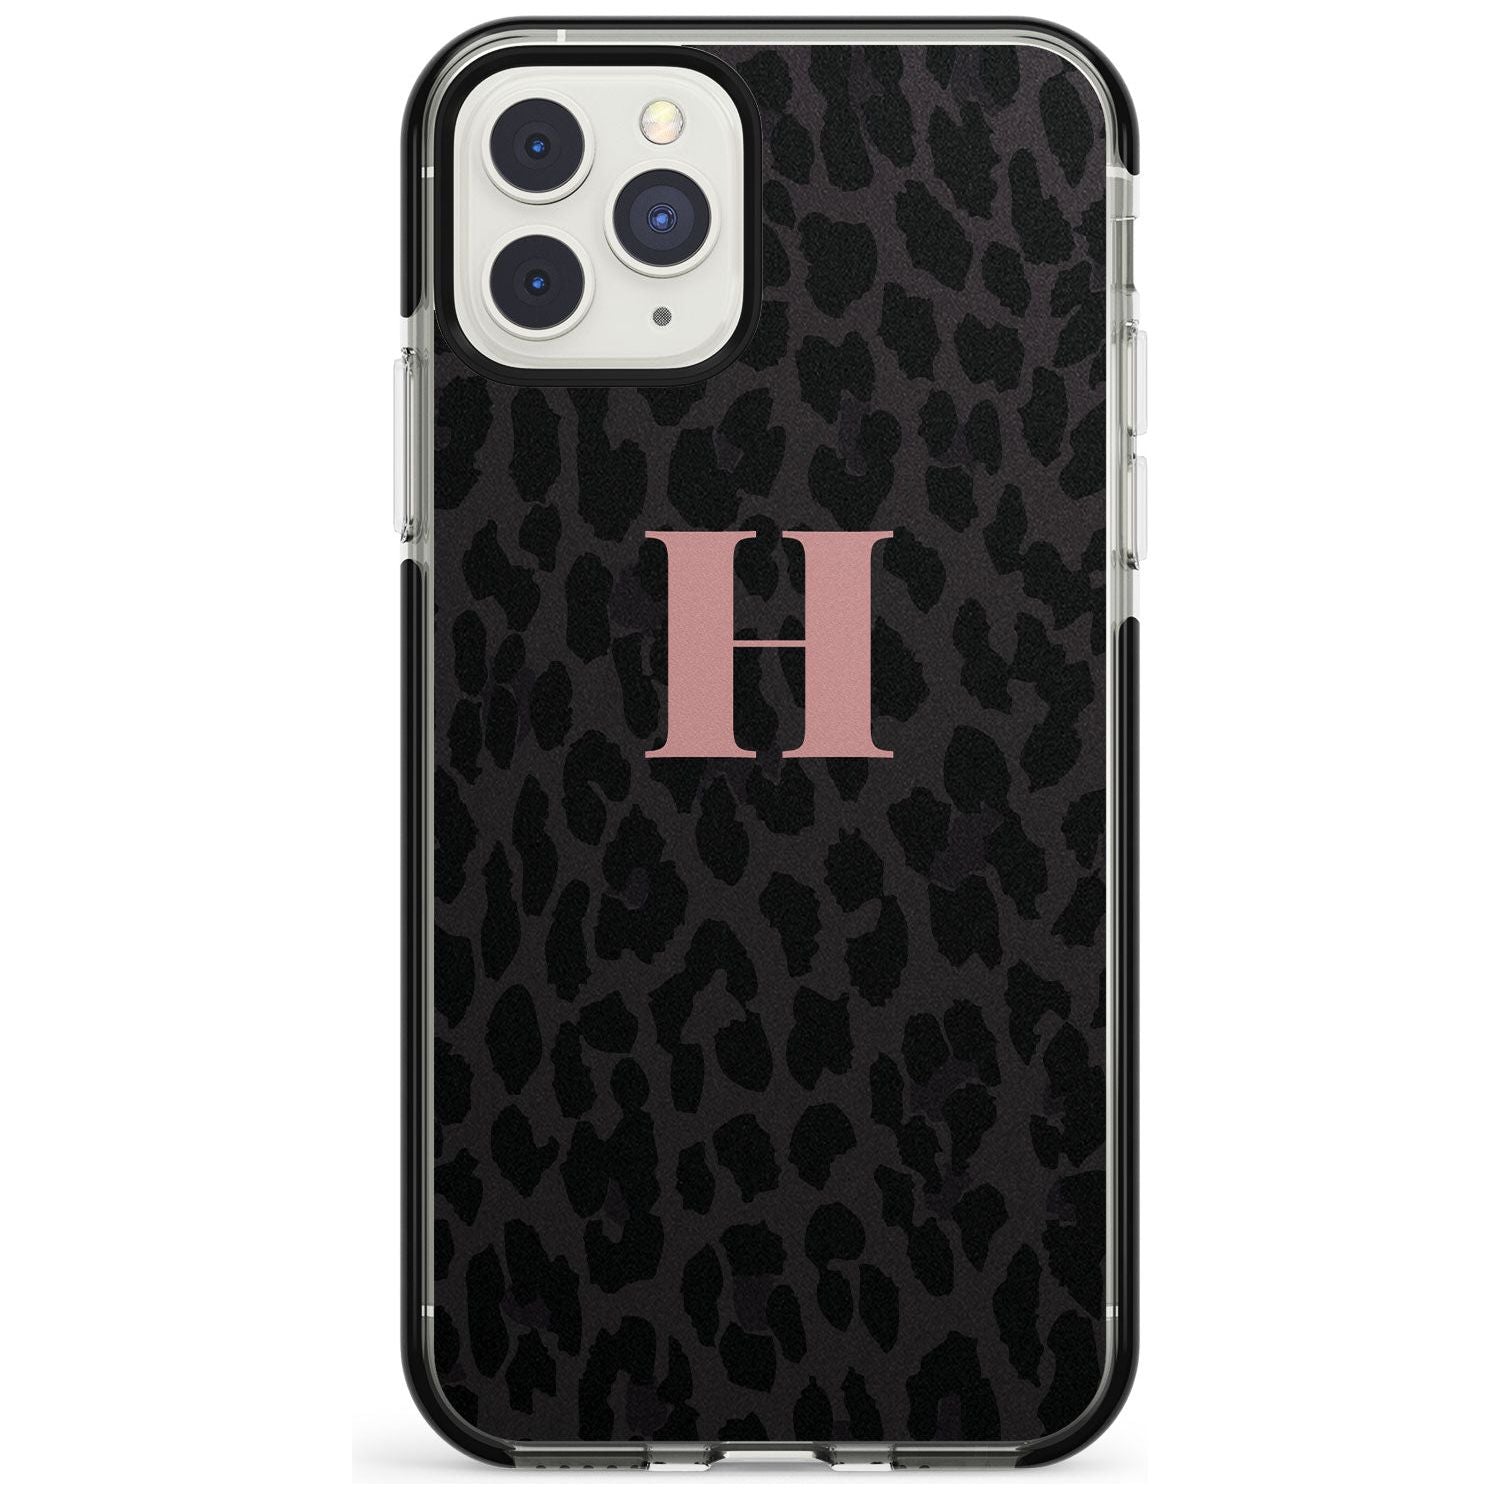 Small Pink Leopard Monogram Black Impact Phone Case for iPhone 11 Pro Max